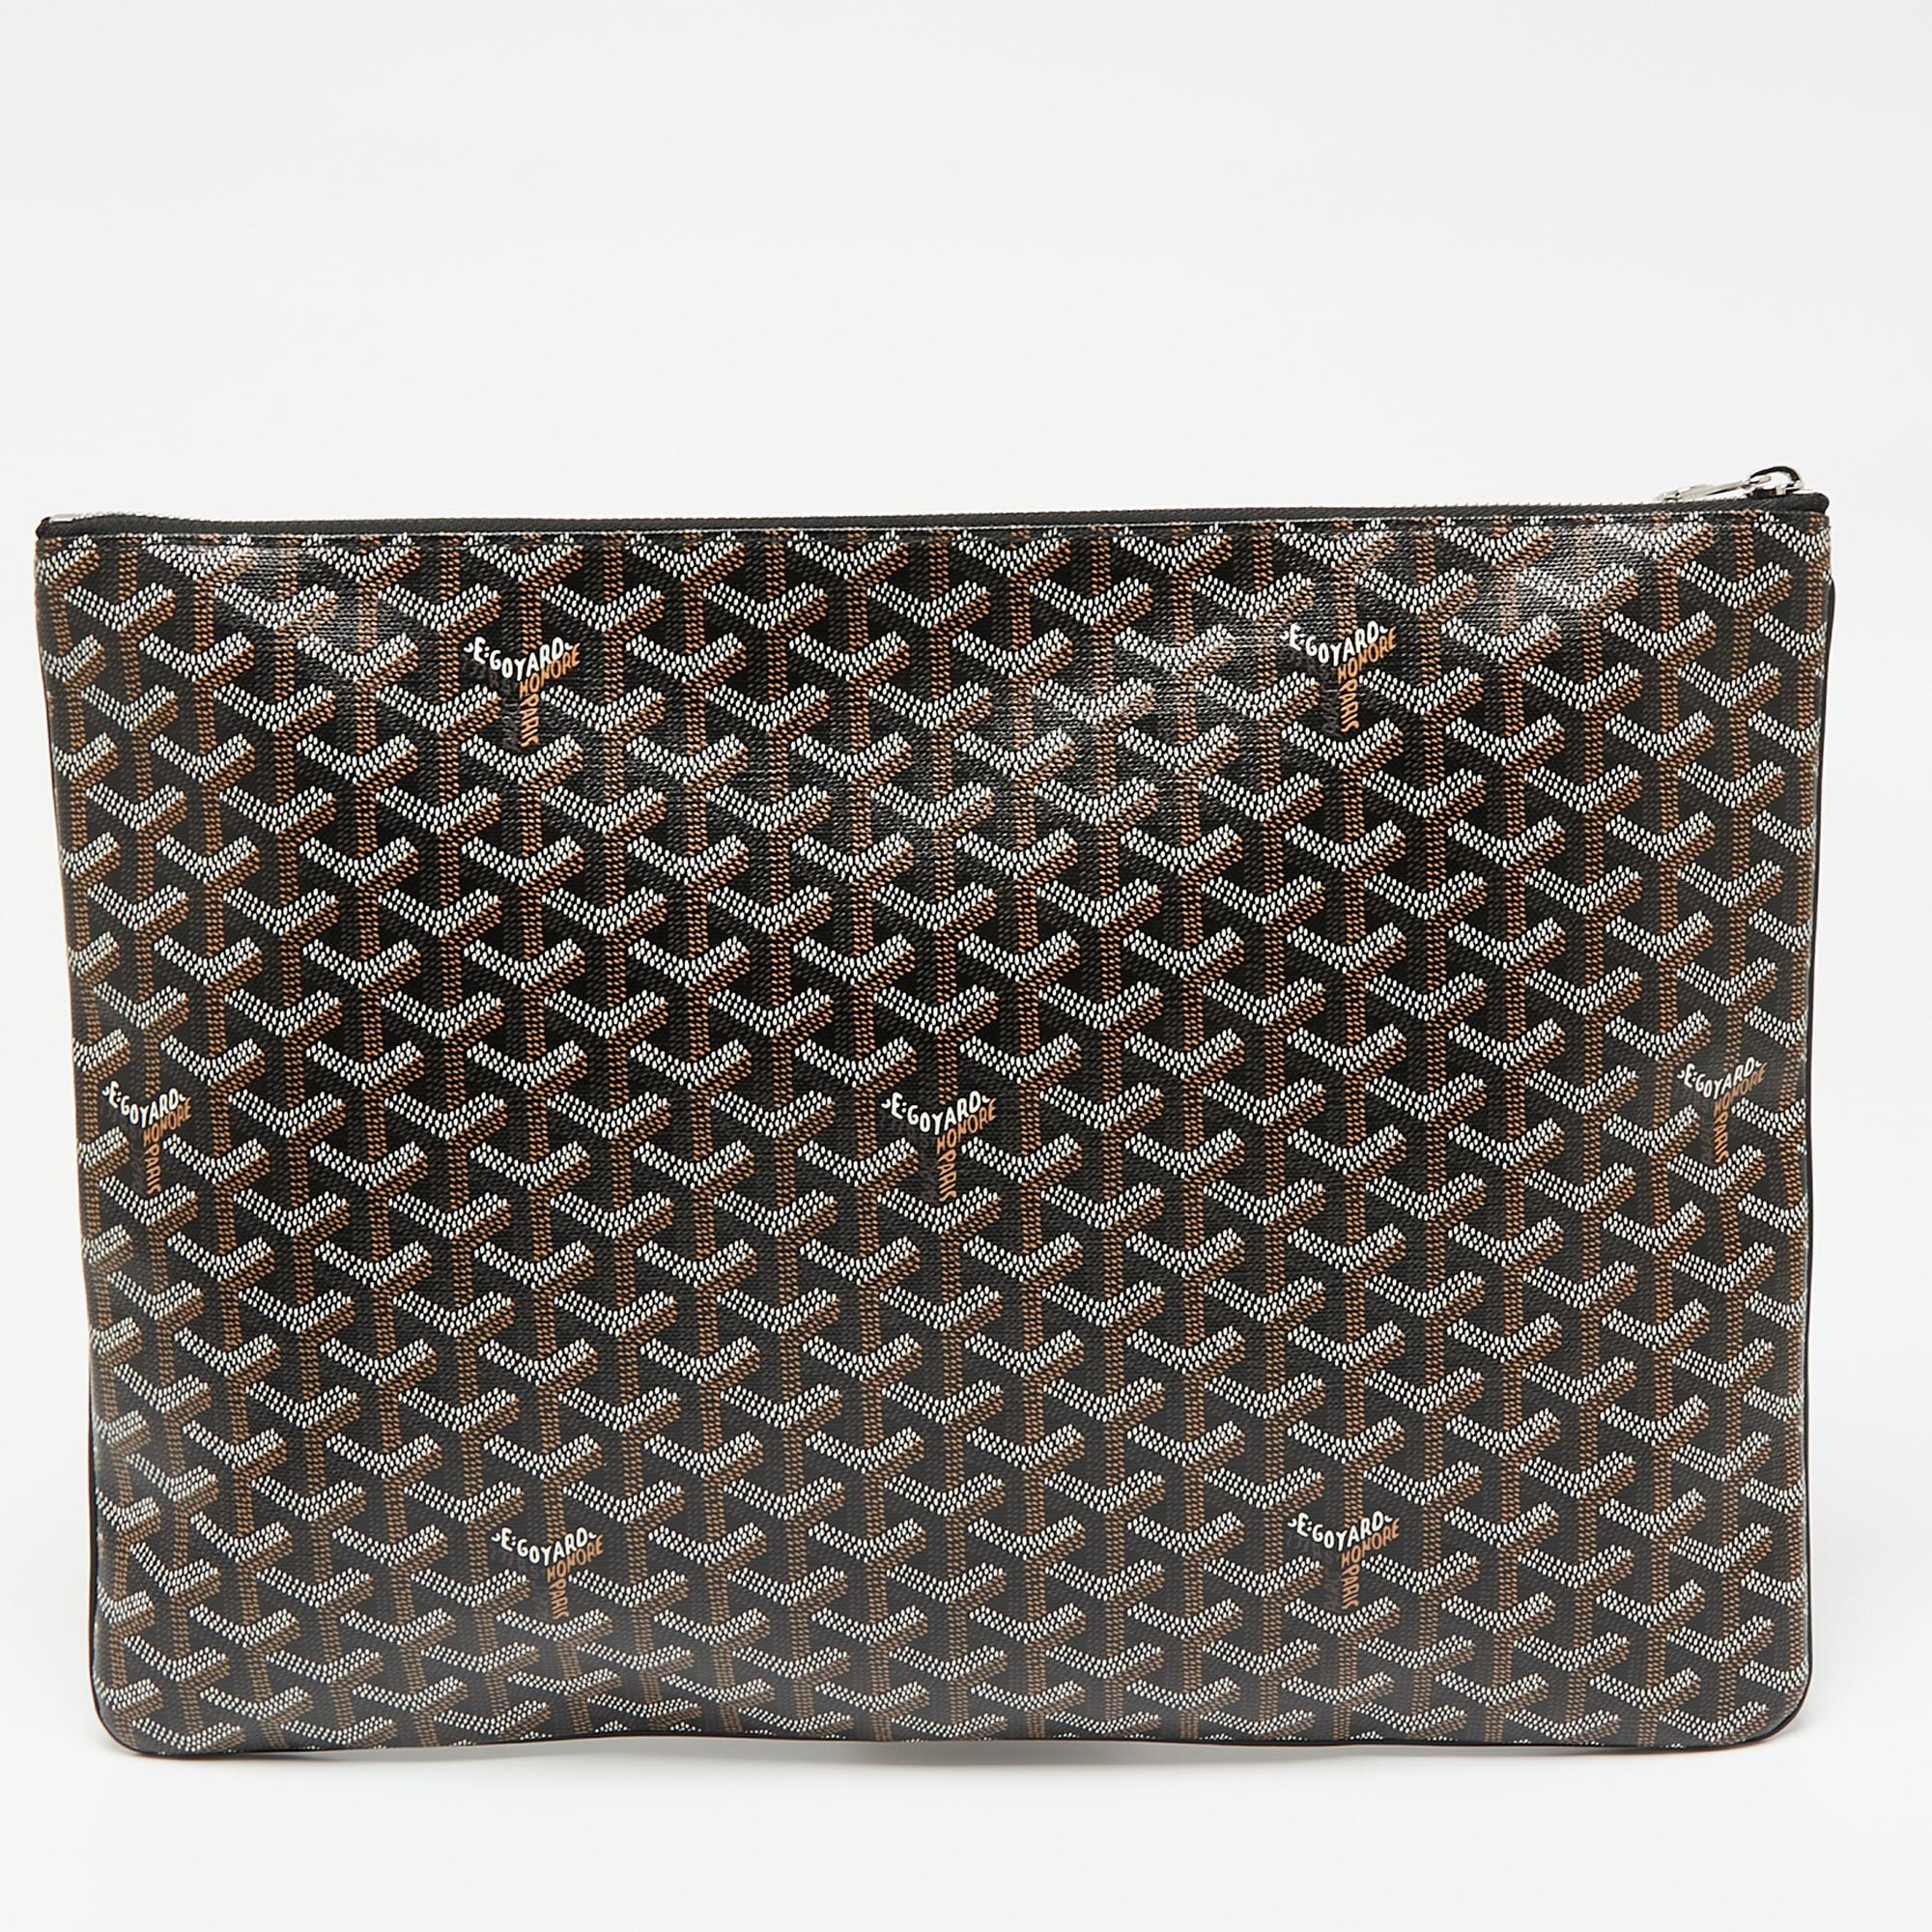 Your ideal grab-and-go companion, this Goyard clutch is enriched with superbly executed details. It symbolizes the heritage of the brand and hence comes made from the signature Goyardine coated canvas. The fabric-lined interior of this Senate GM